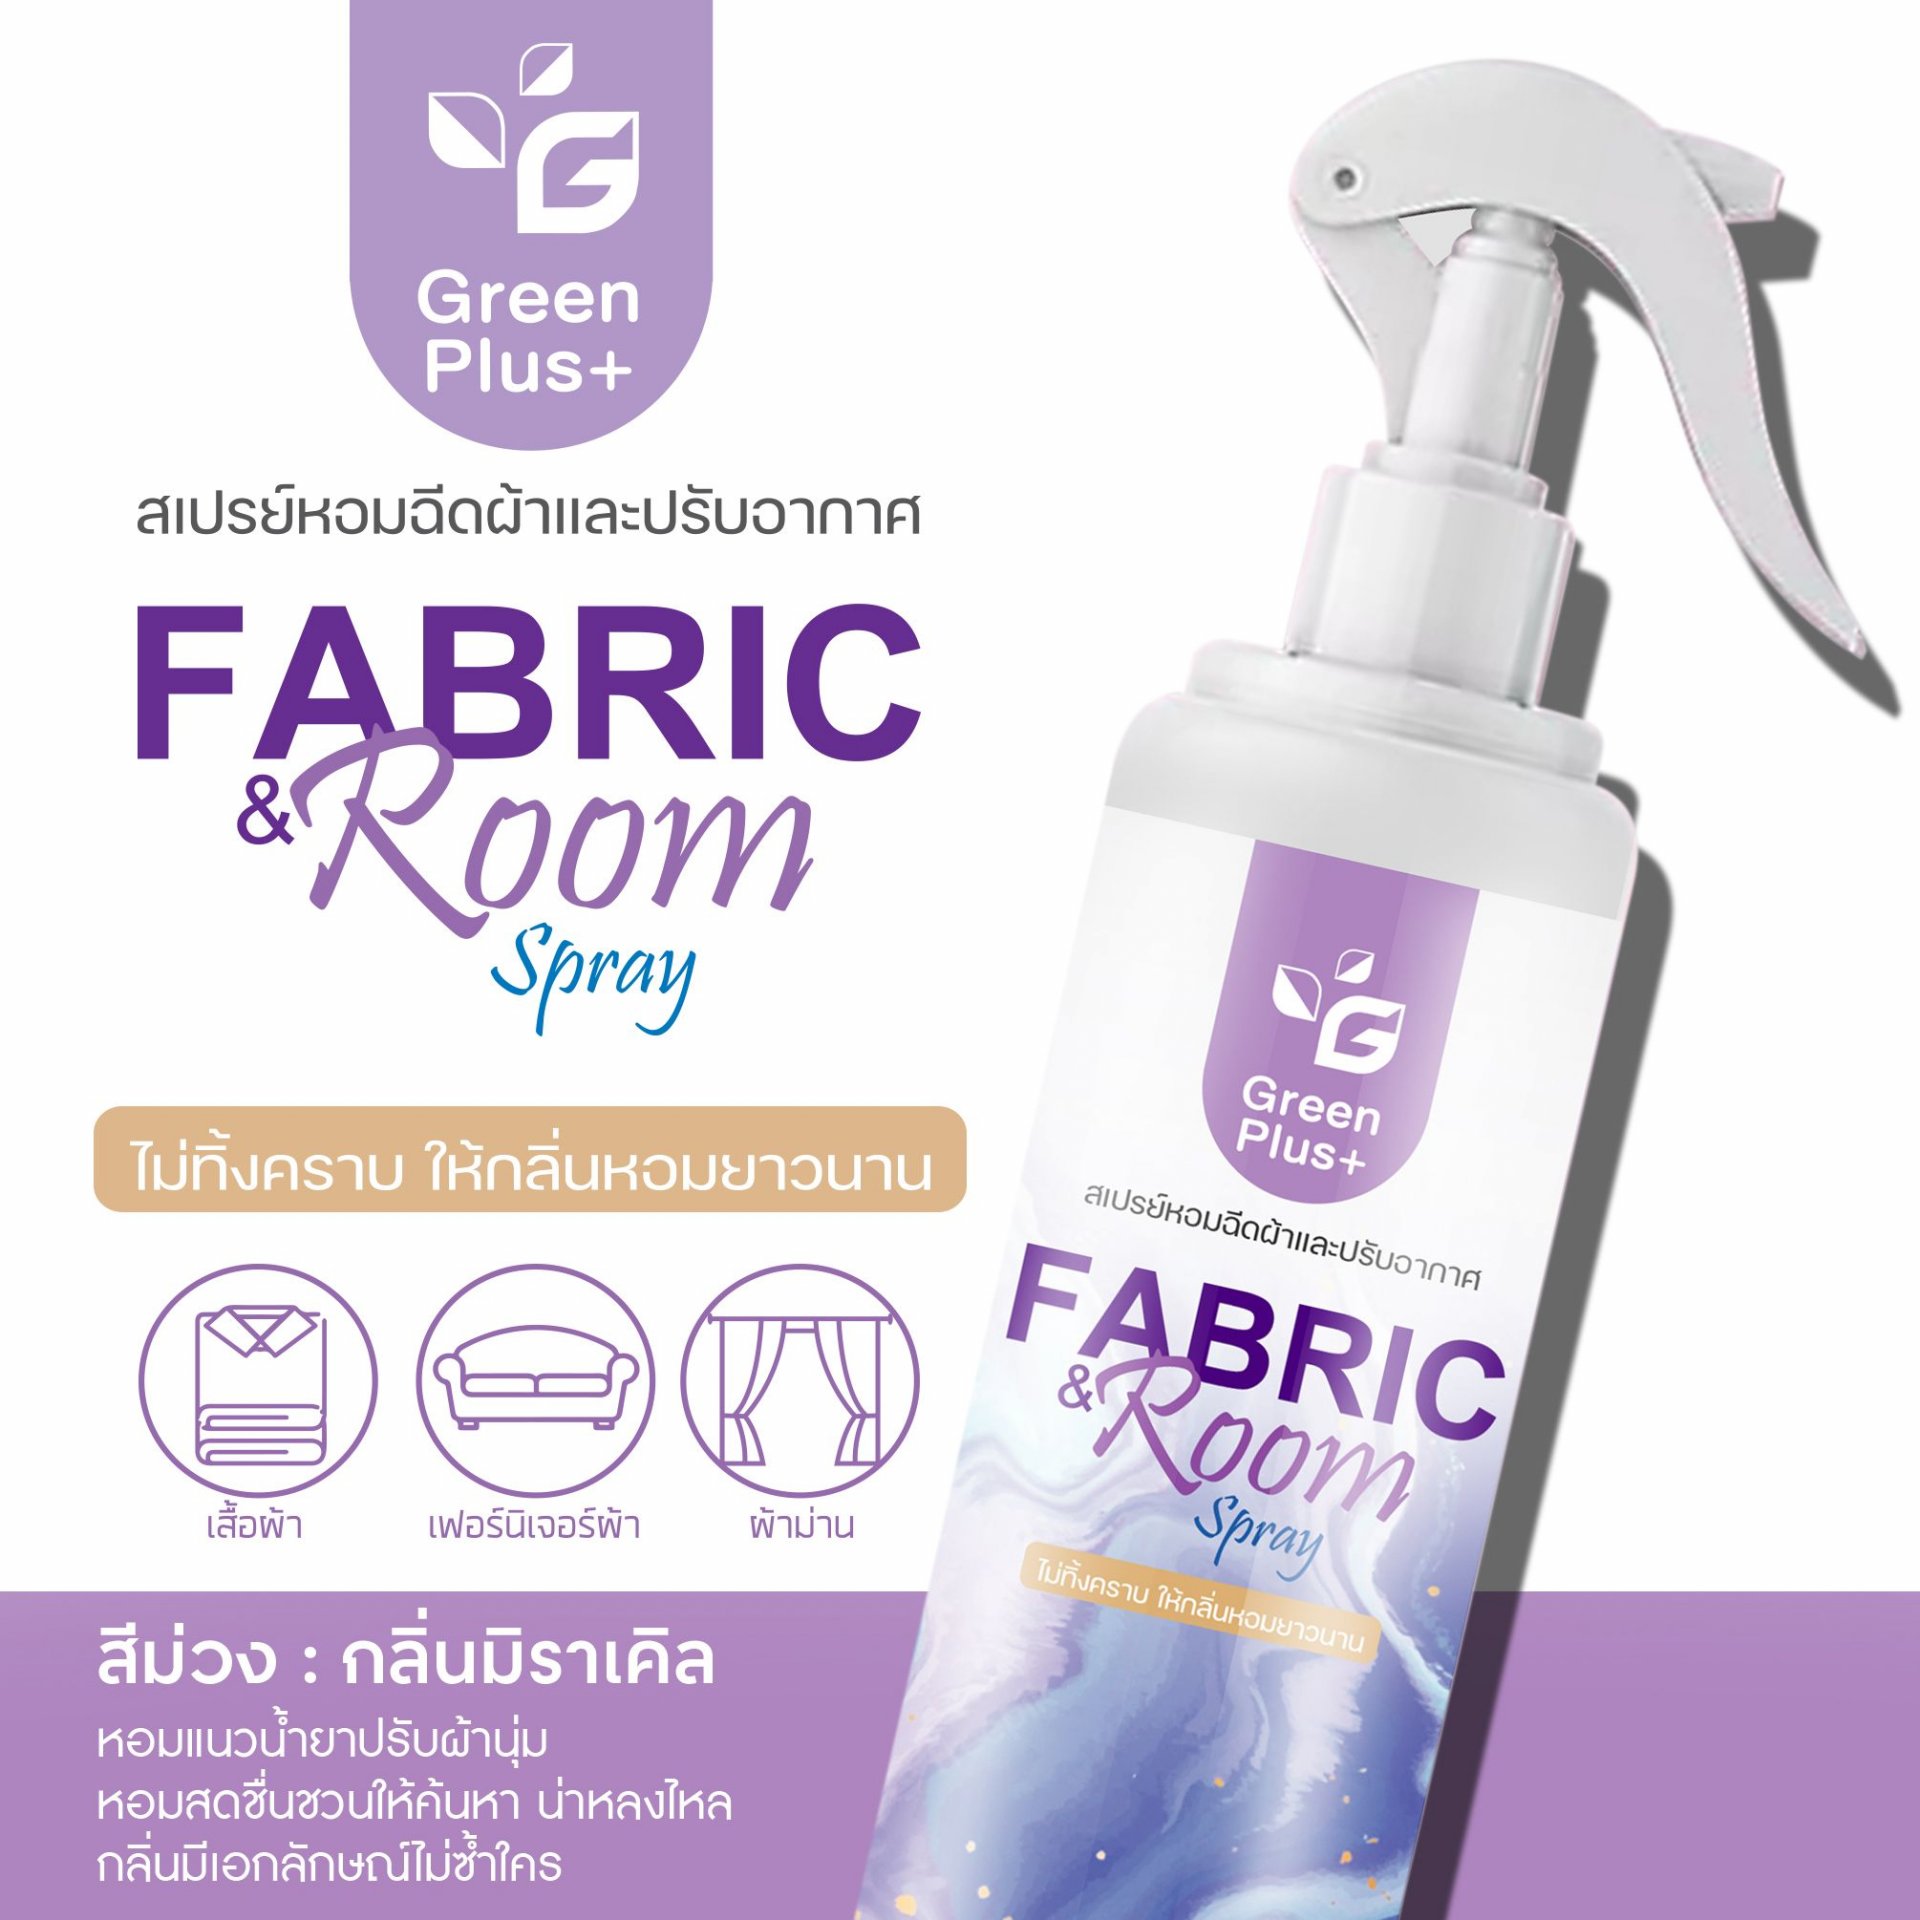 GREEN PLUS FABRIC AND ROOM SPRAY : Miracle scent